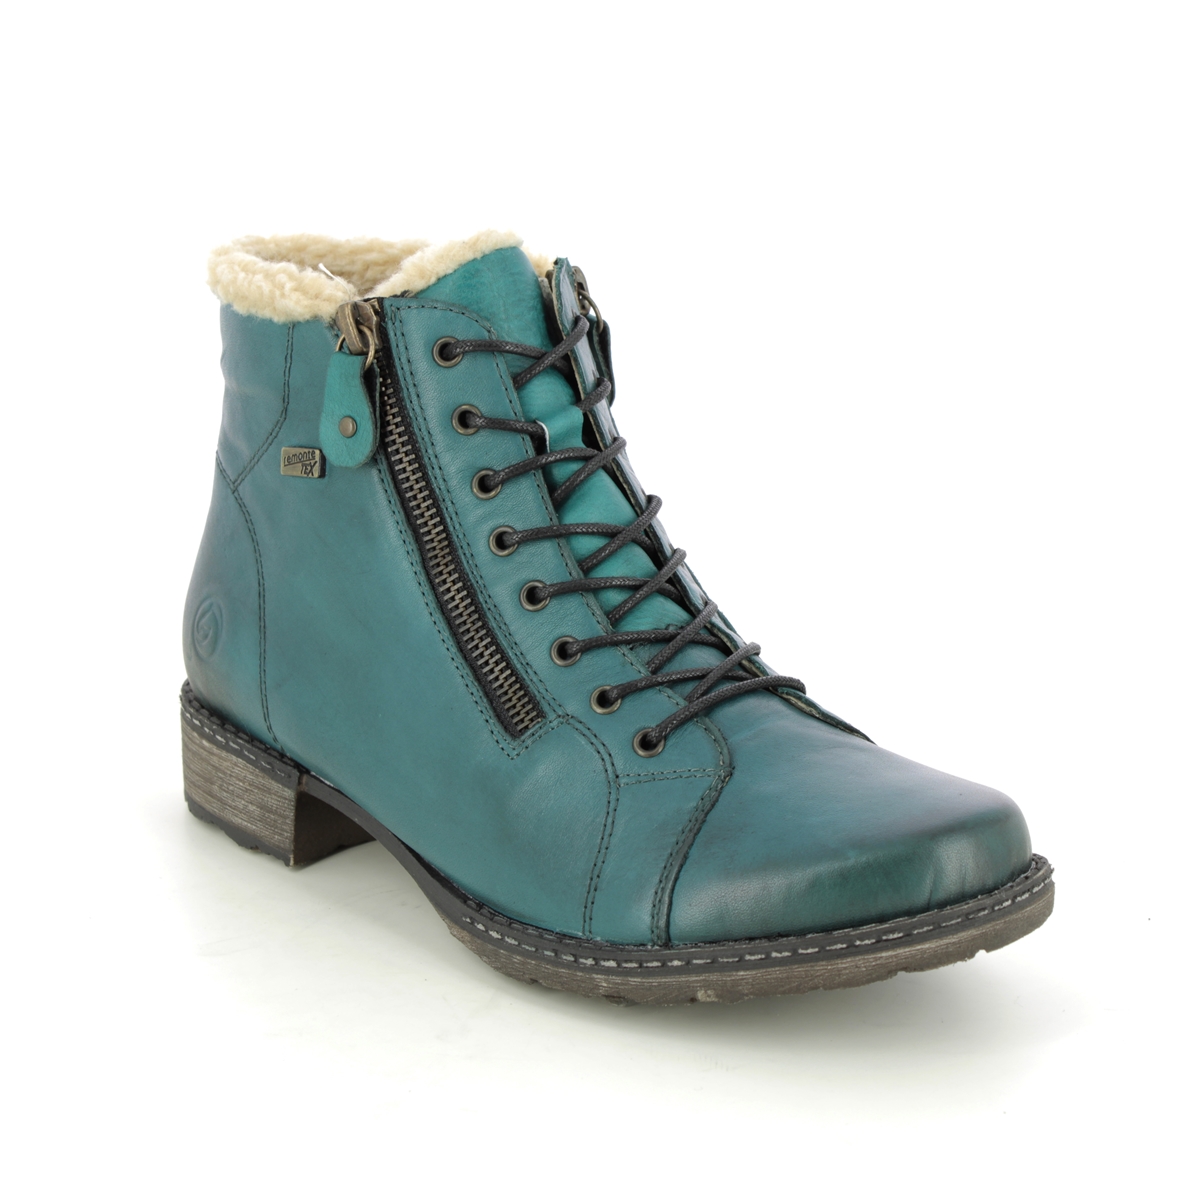 Remonte Peesienna Tex Turquoise Leather Womens Lace Up Boots D4372-12 In Size 40 In Plain Turquoise Leather